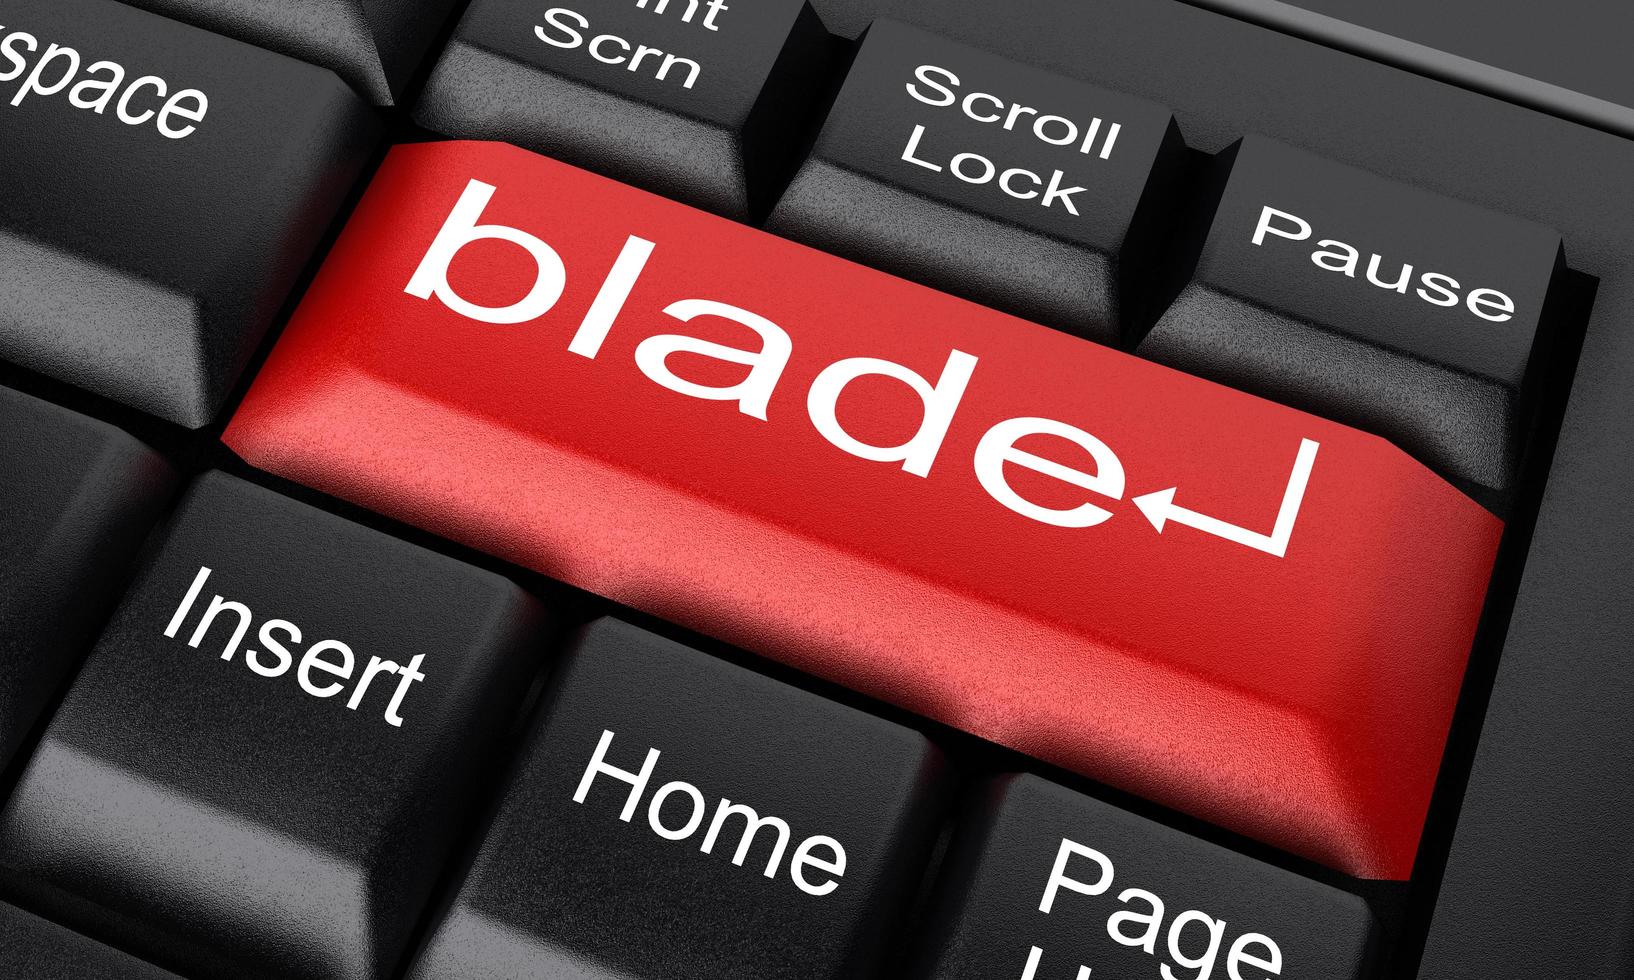 blade word on red keyboard button photo